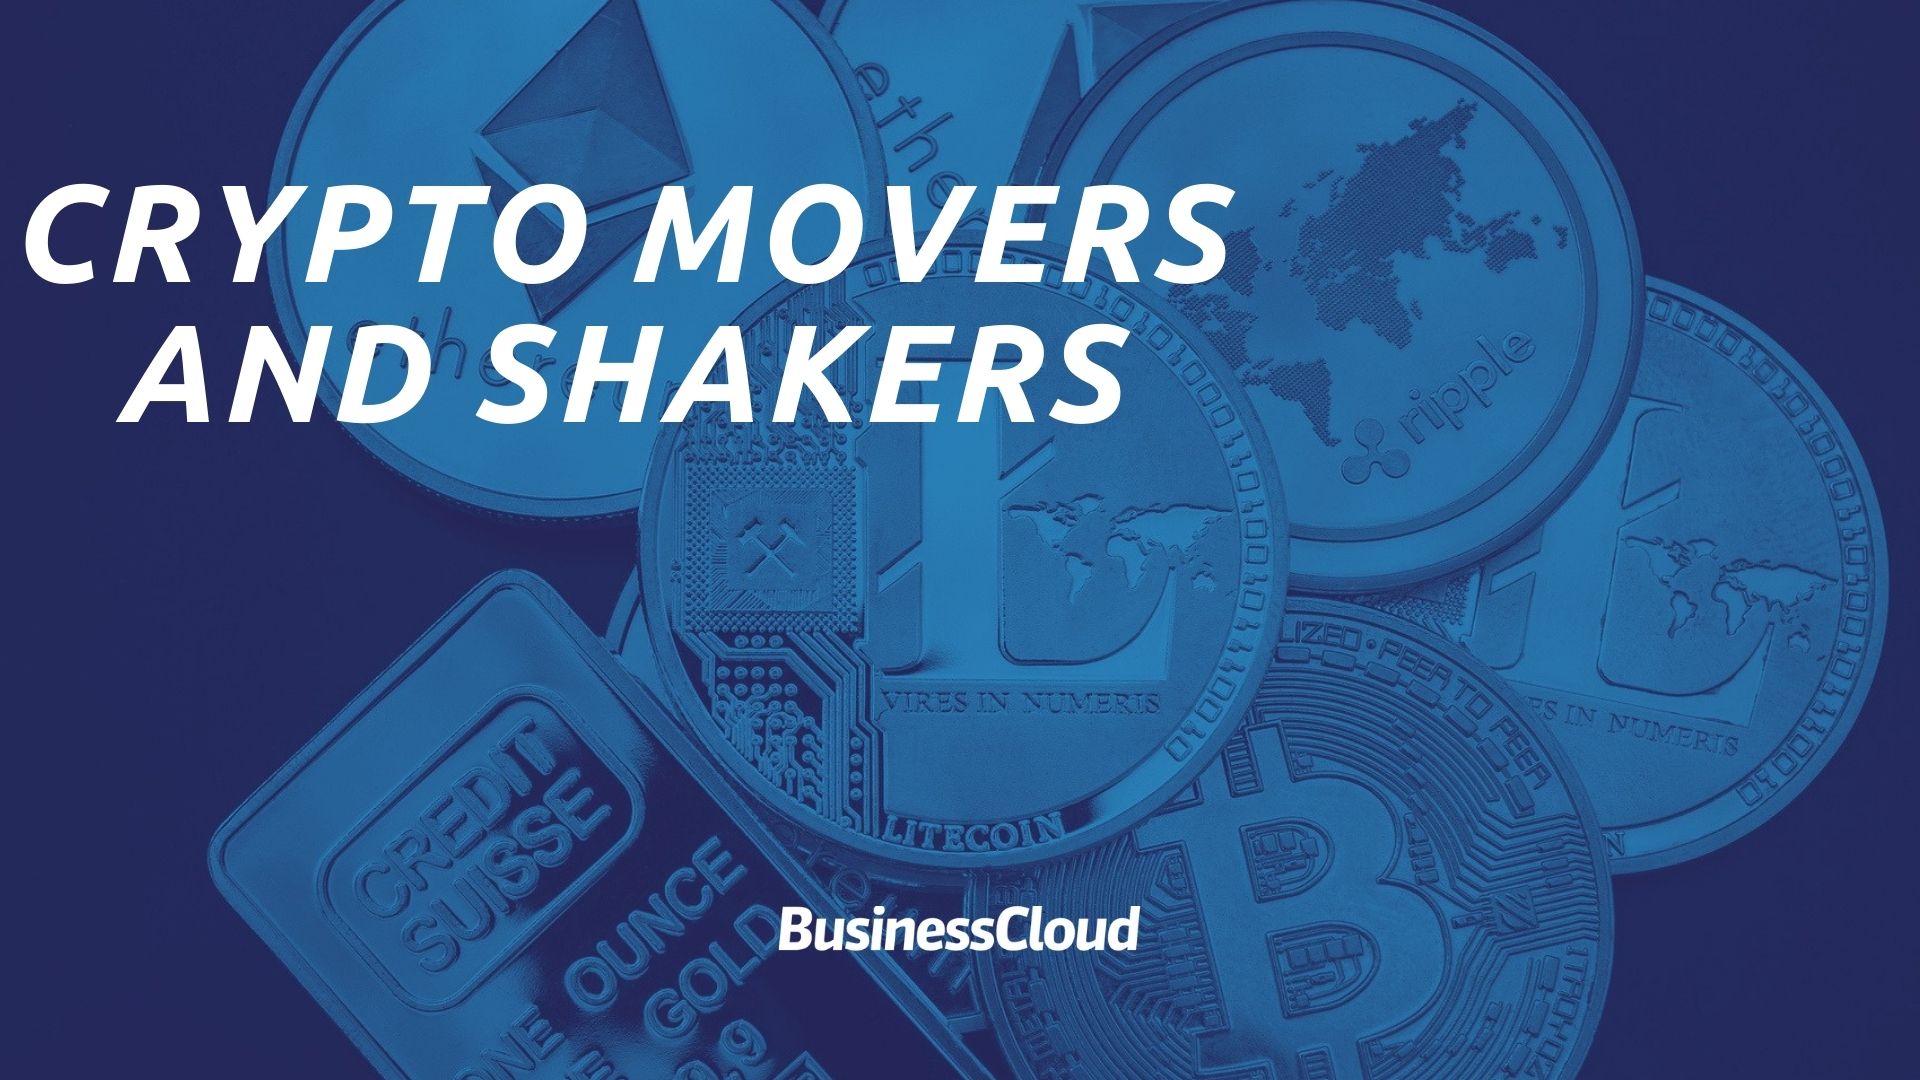 Crypto movers and shakers